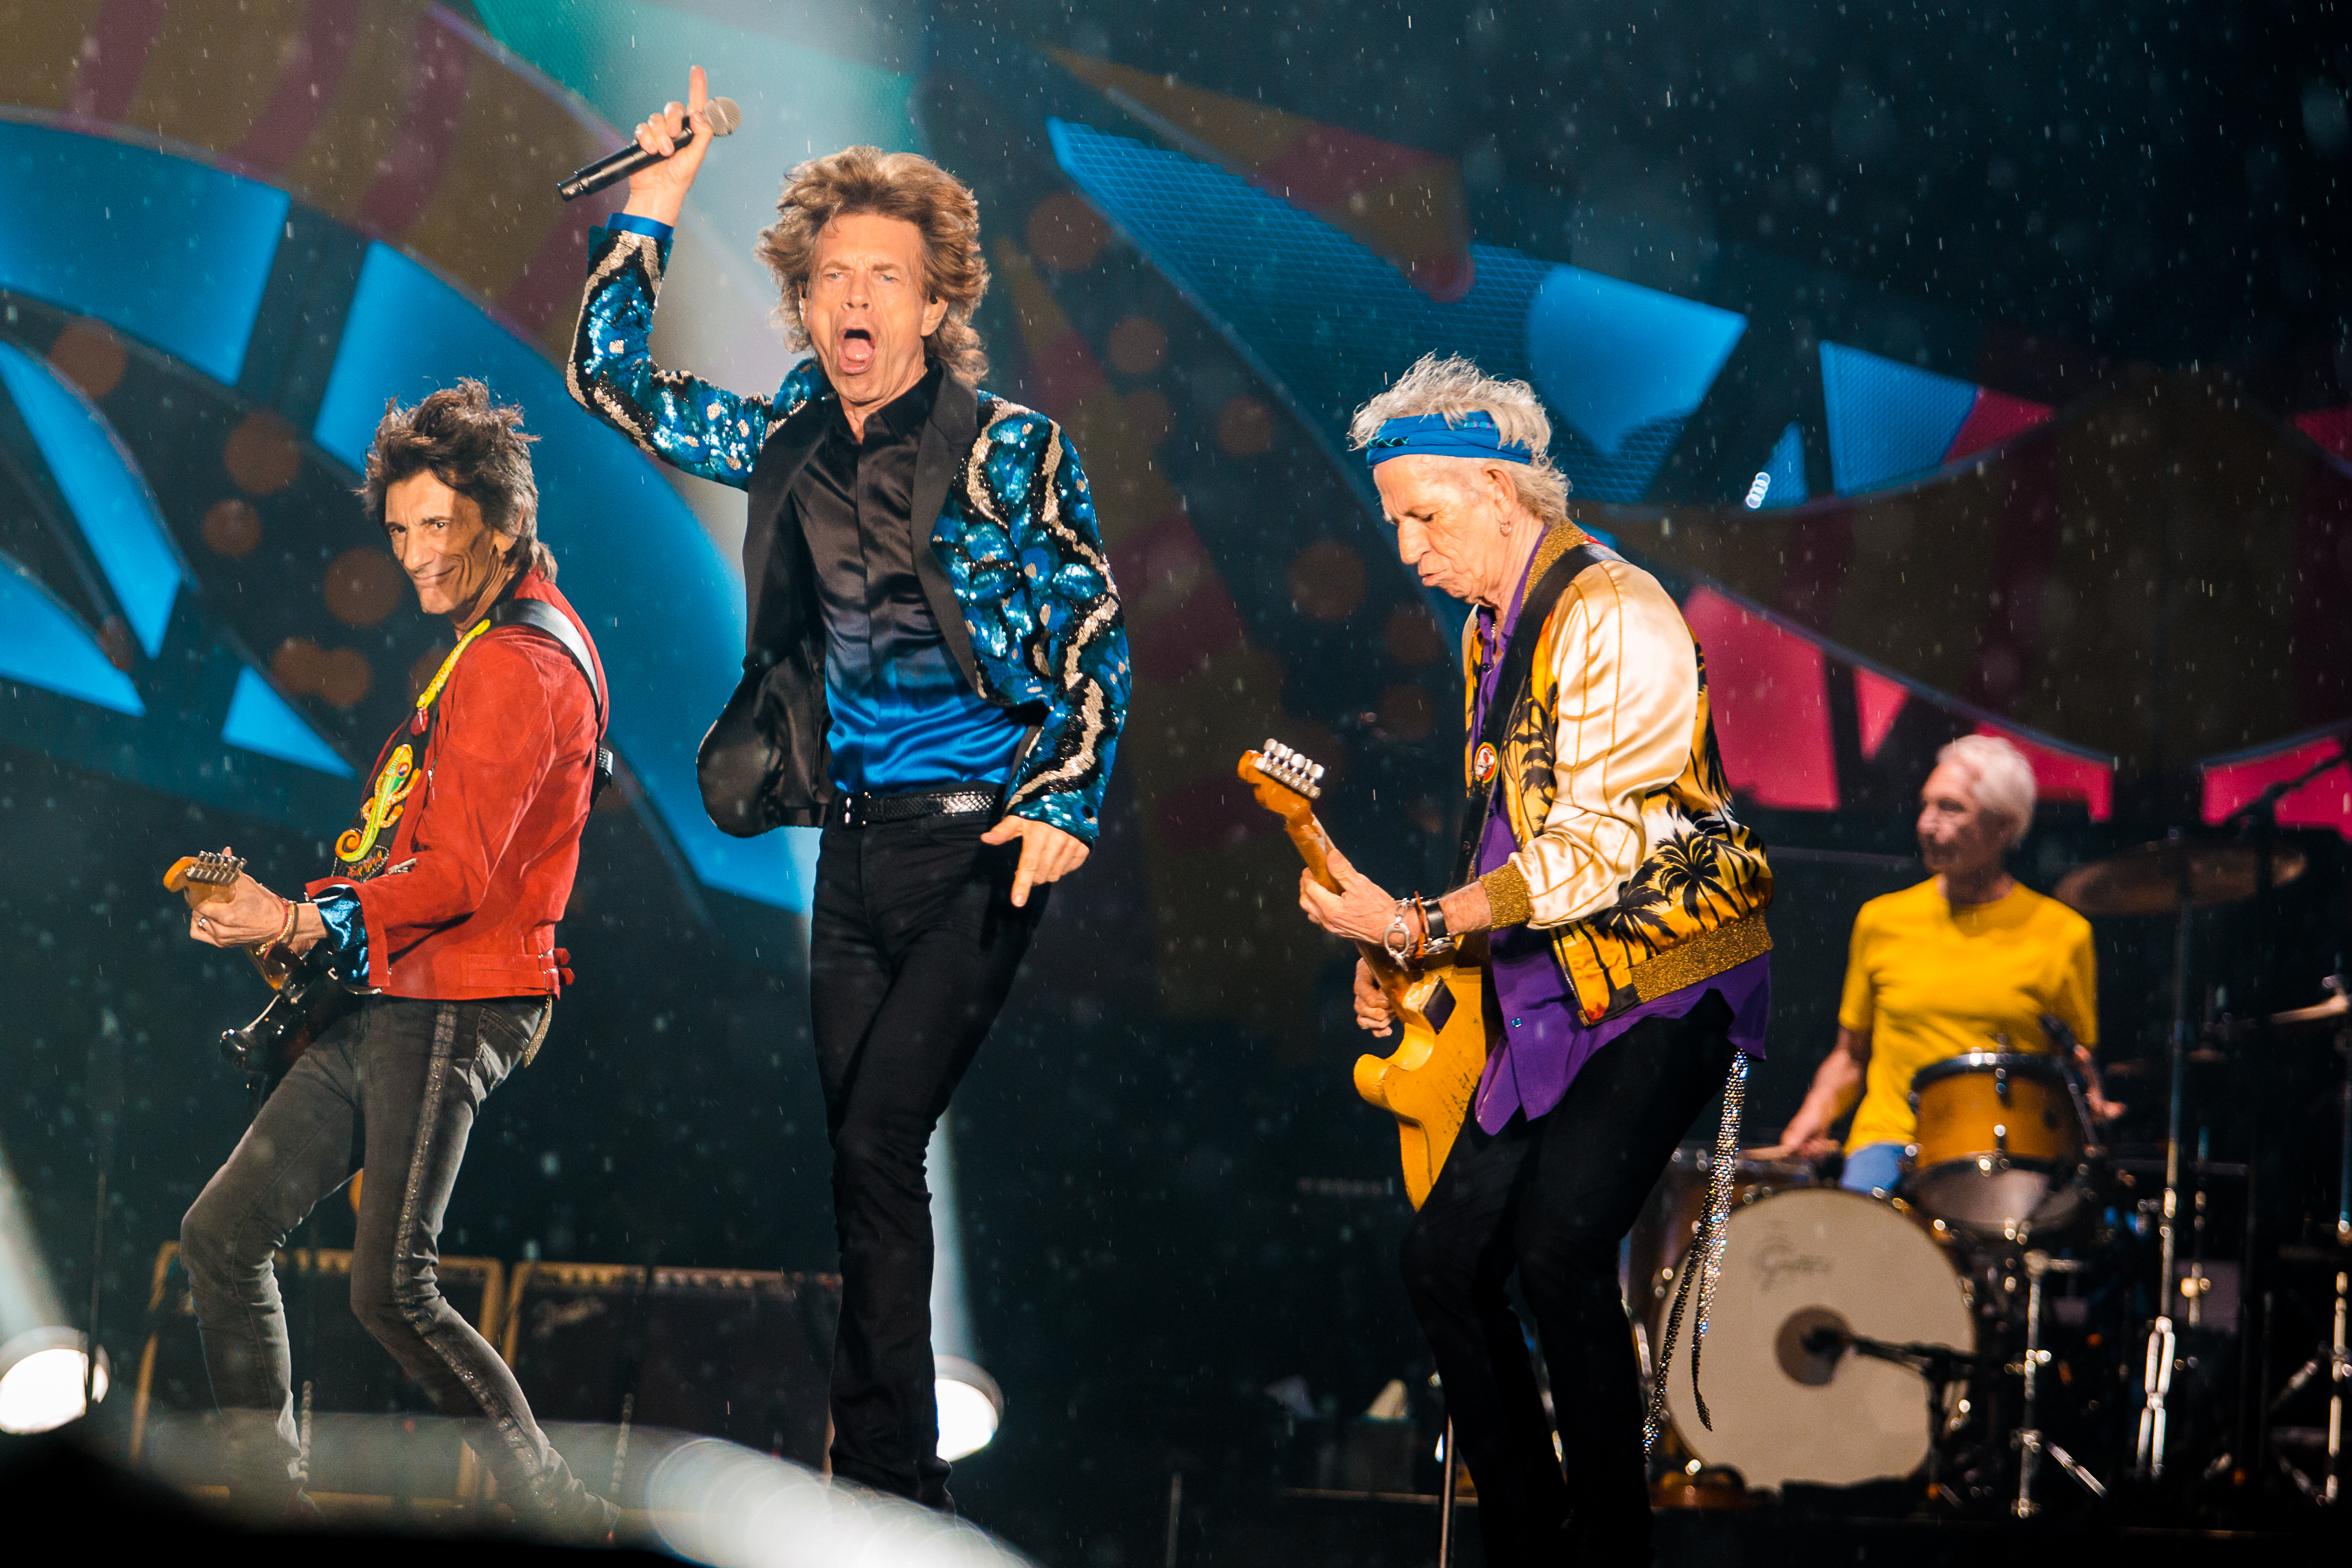 4. The Rolling Stones